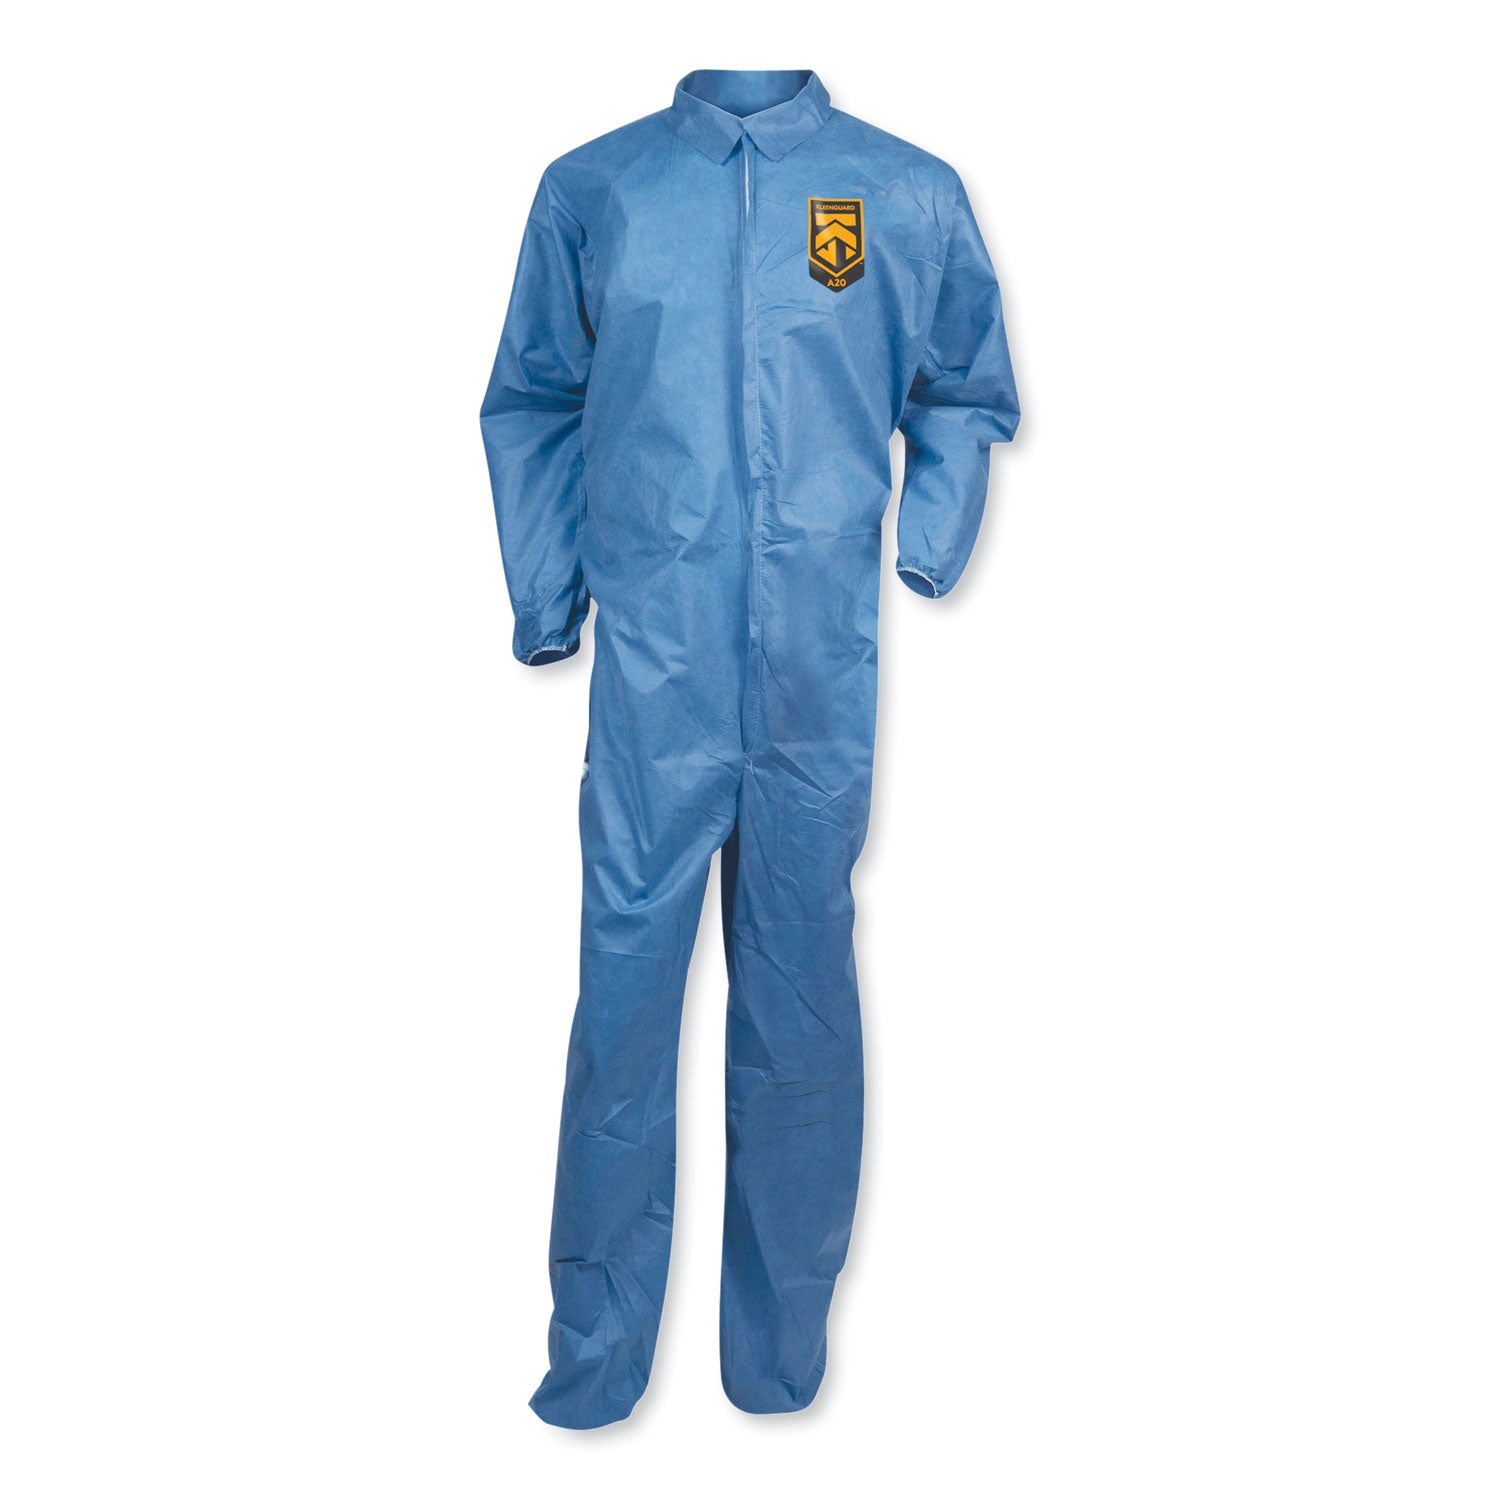 A20 Coveralls, MICROFORCE Barrier SMS Fabric, X-Large, Blue, 24/Carton - 